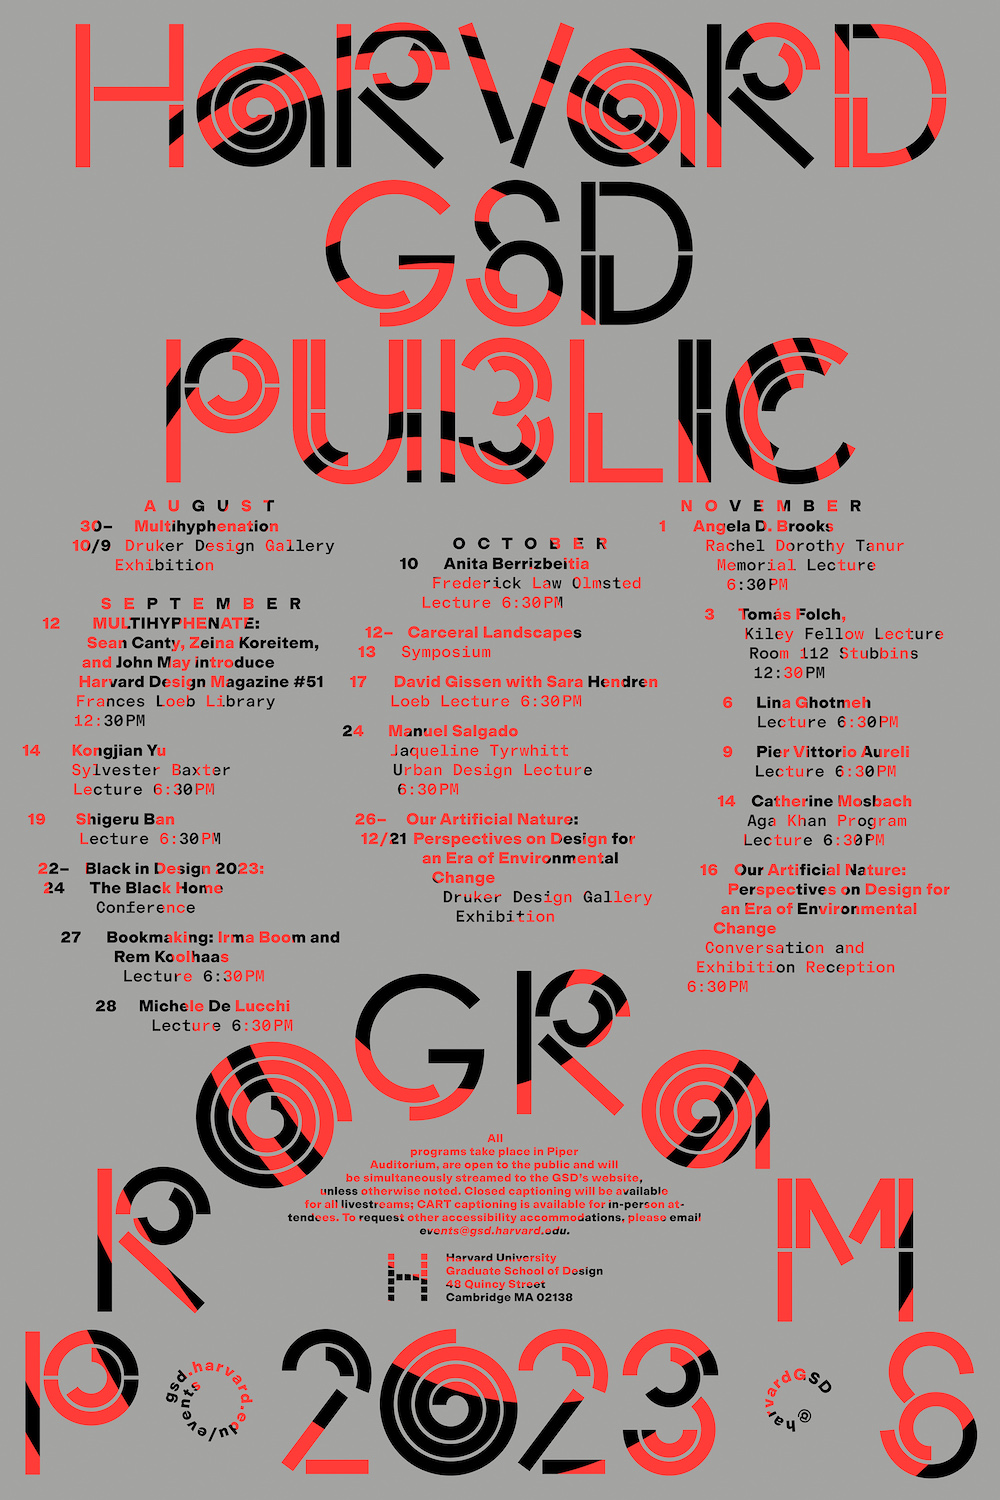 Gray, red, and black GSD Public Programs poster.